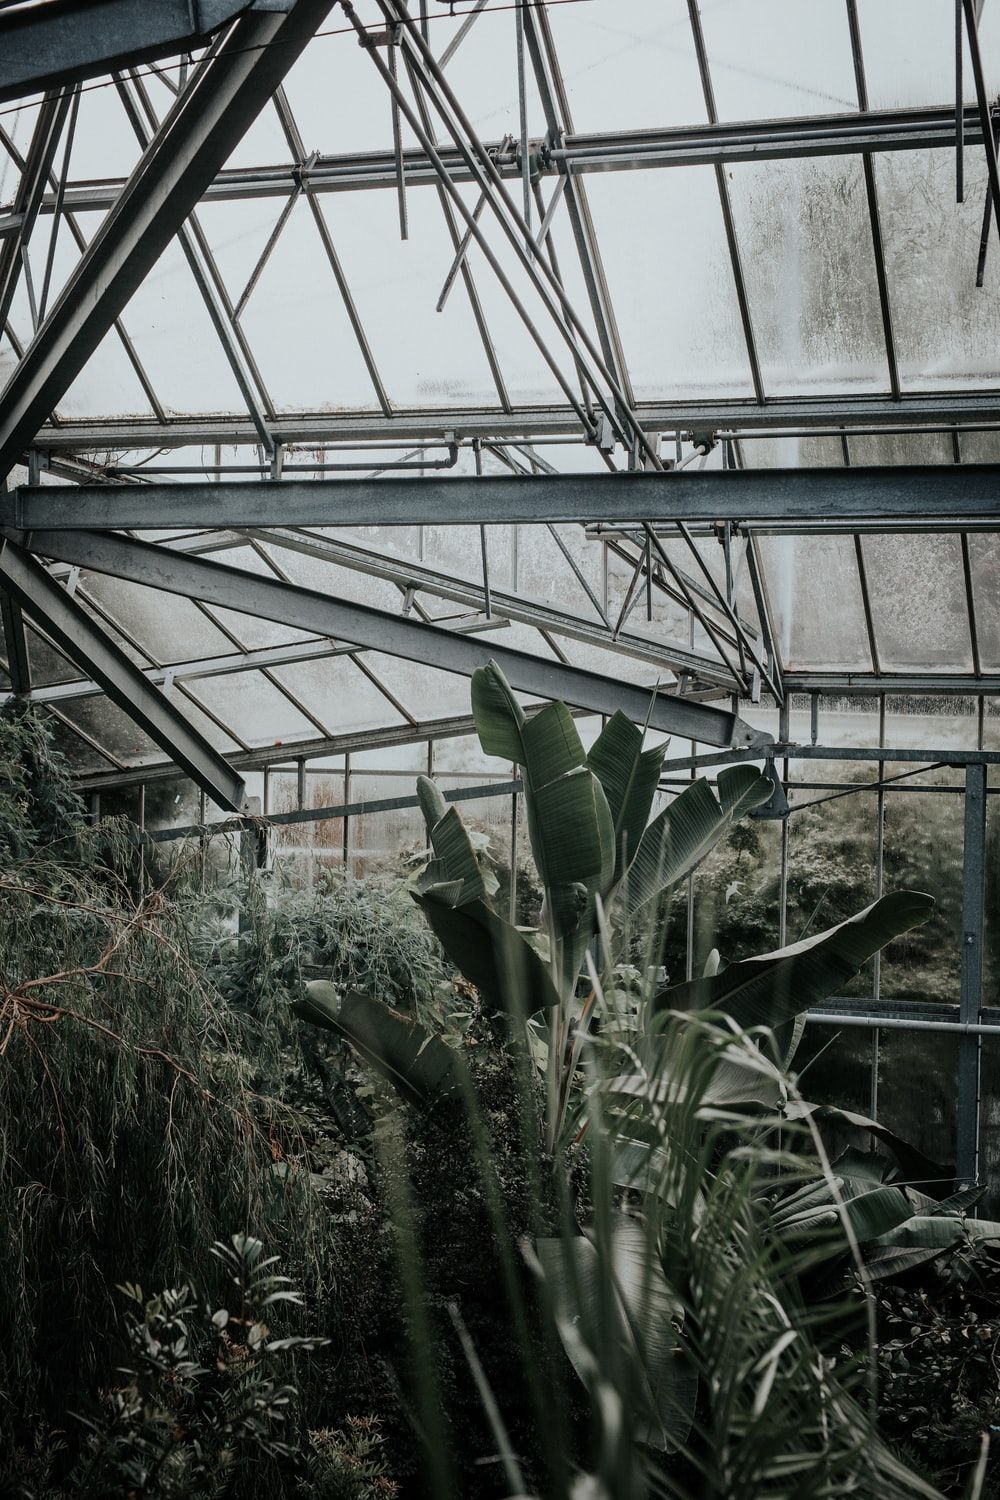 Greenhouse Effect Picture. Download Free Image